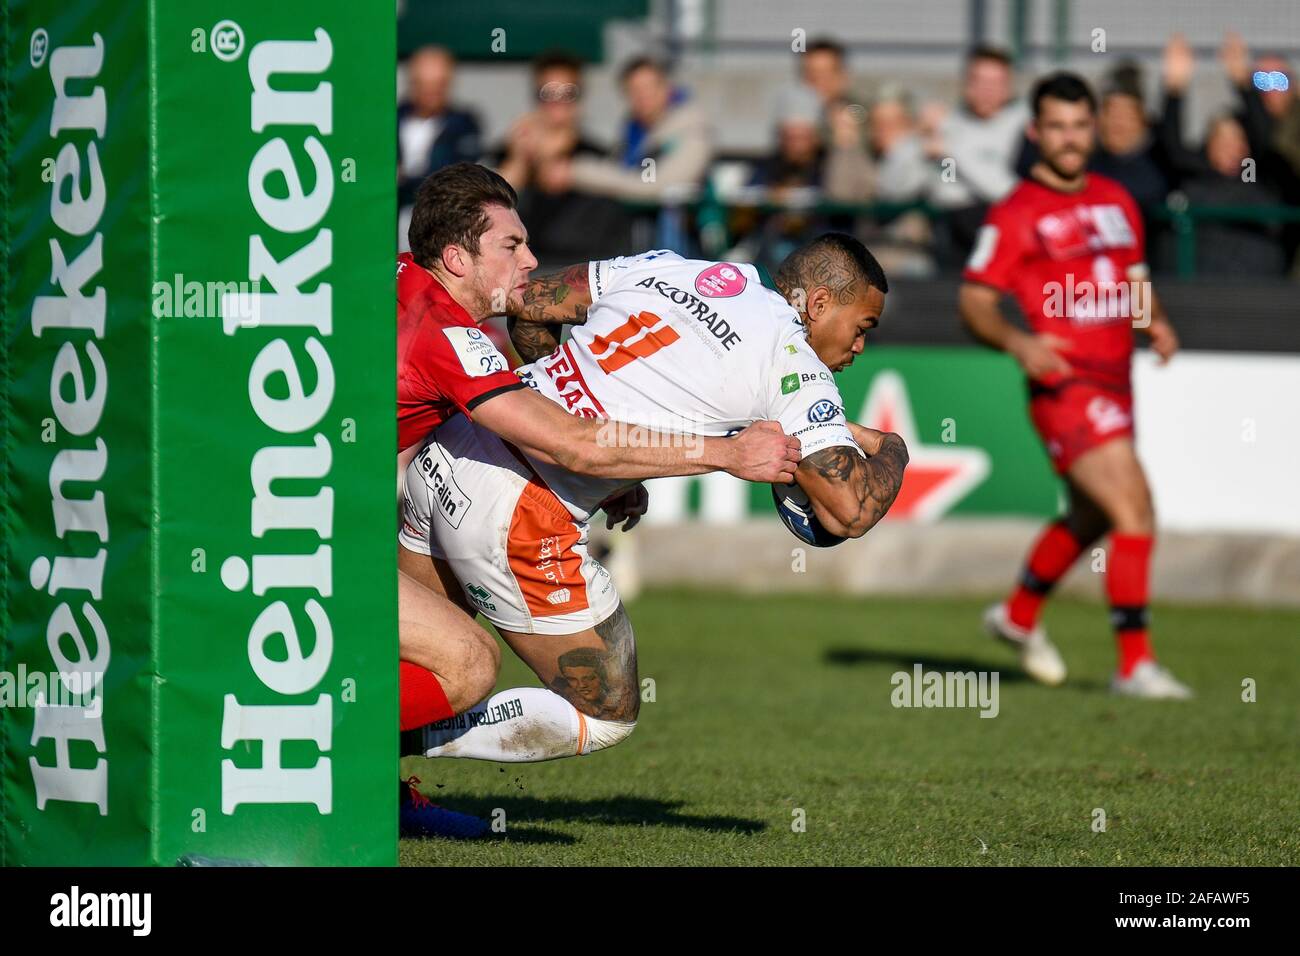 Treviso, Italy, 14 Dec 2019, tackle of irne herbst (treviso) on pato  fernandez (lyon) during Benetton Treviso vs Lyon - Rugby Heineken Champions  Cup - Credit: LPS/Ettore Griffoni/Alamy Live News Stock Photo - Alamy